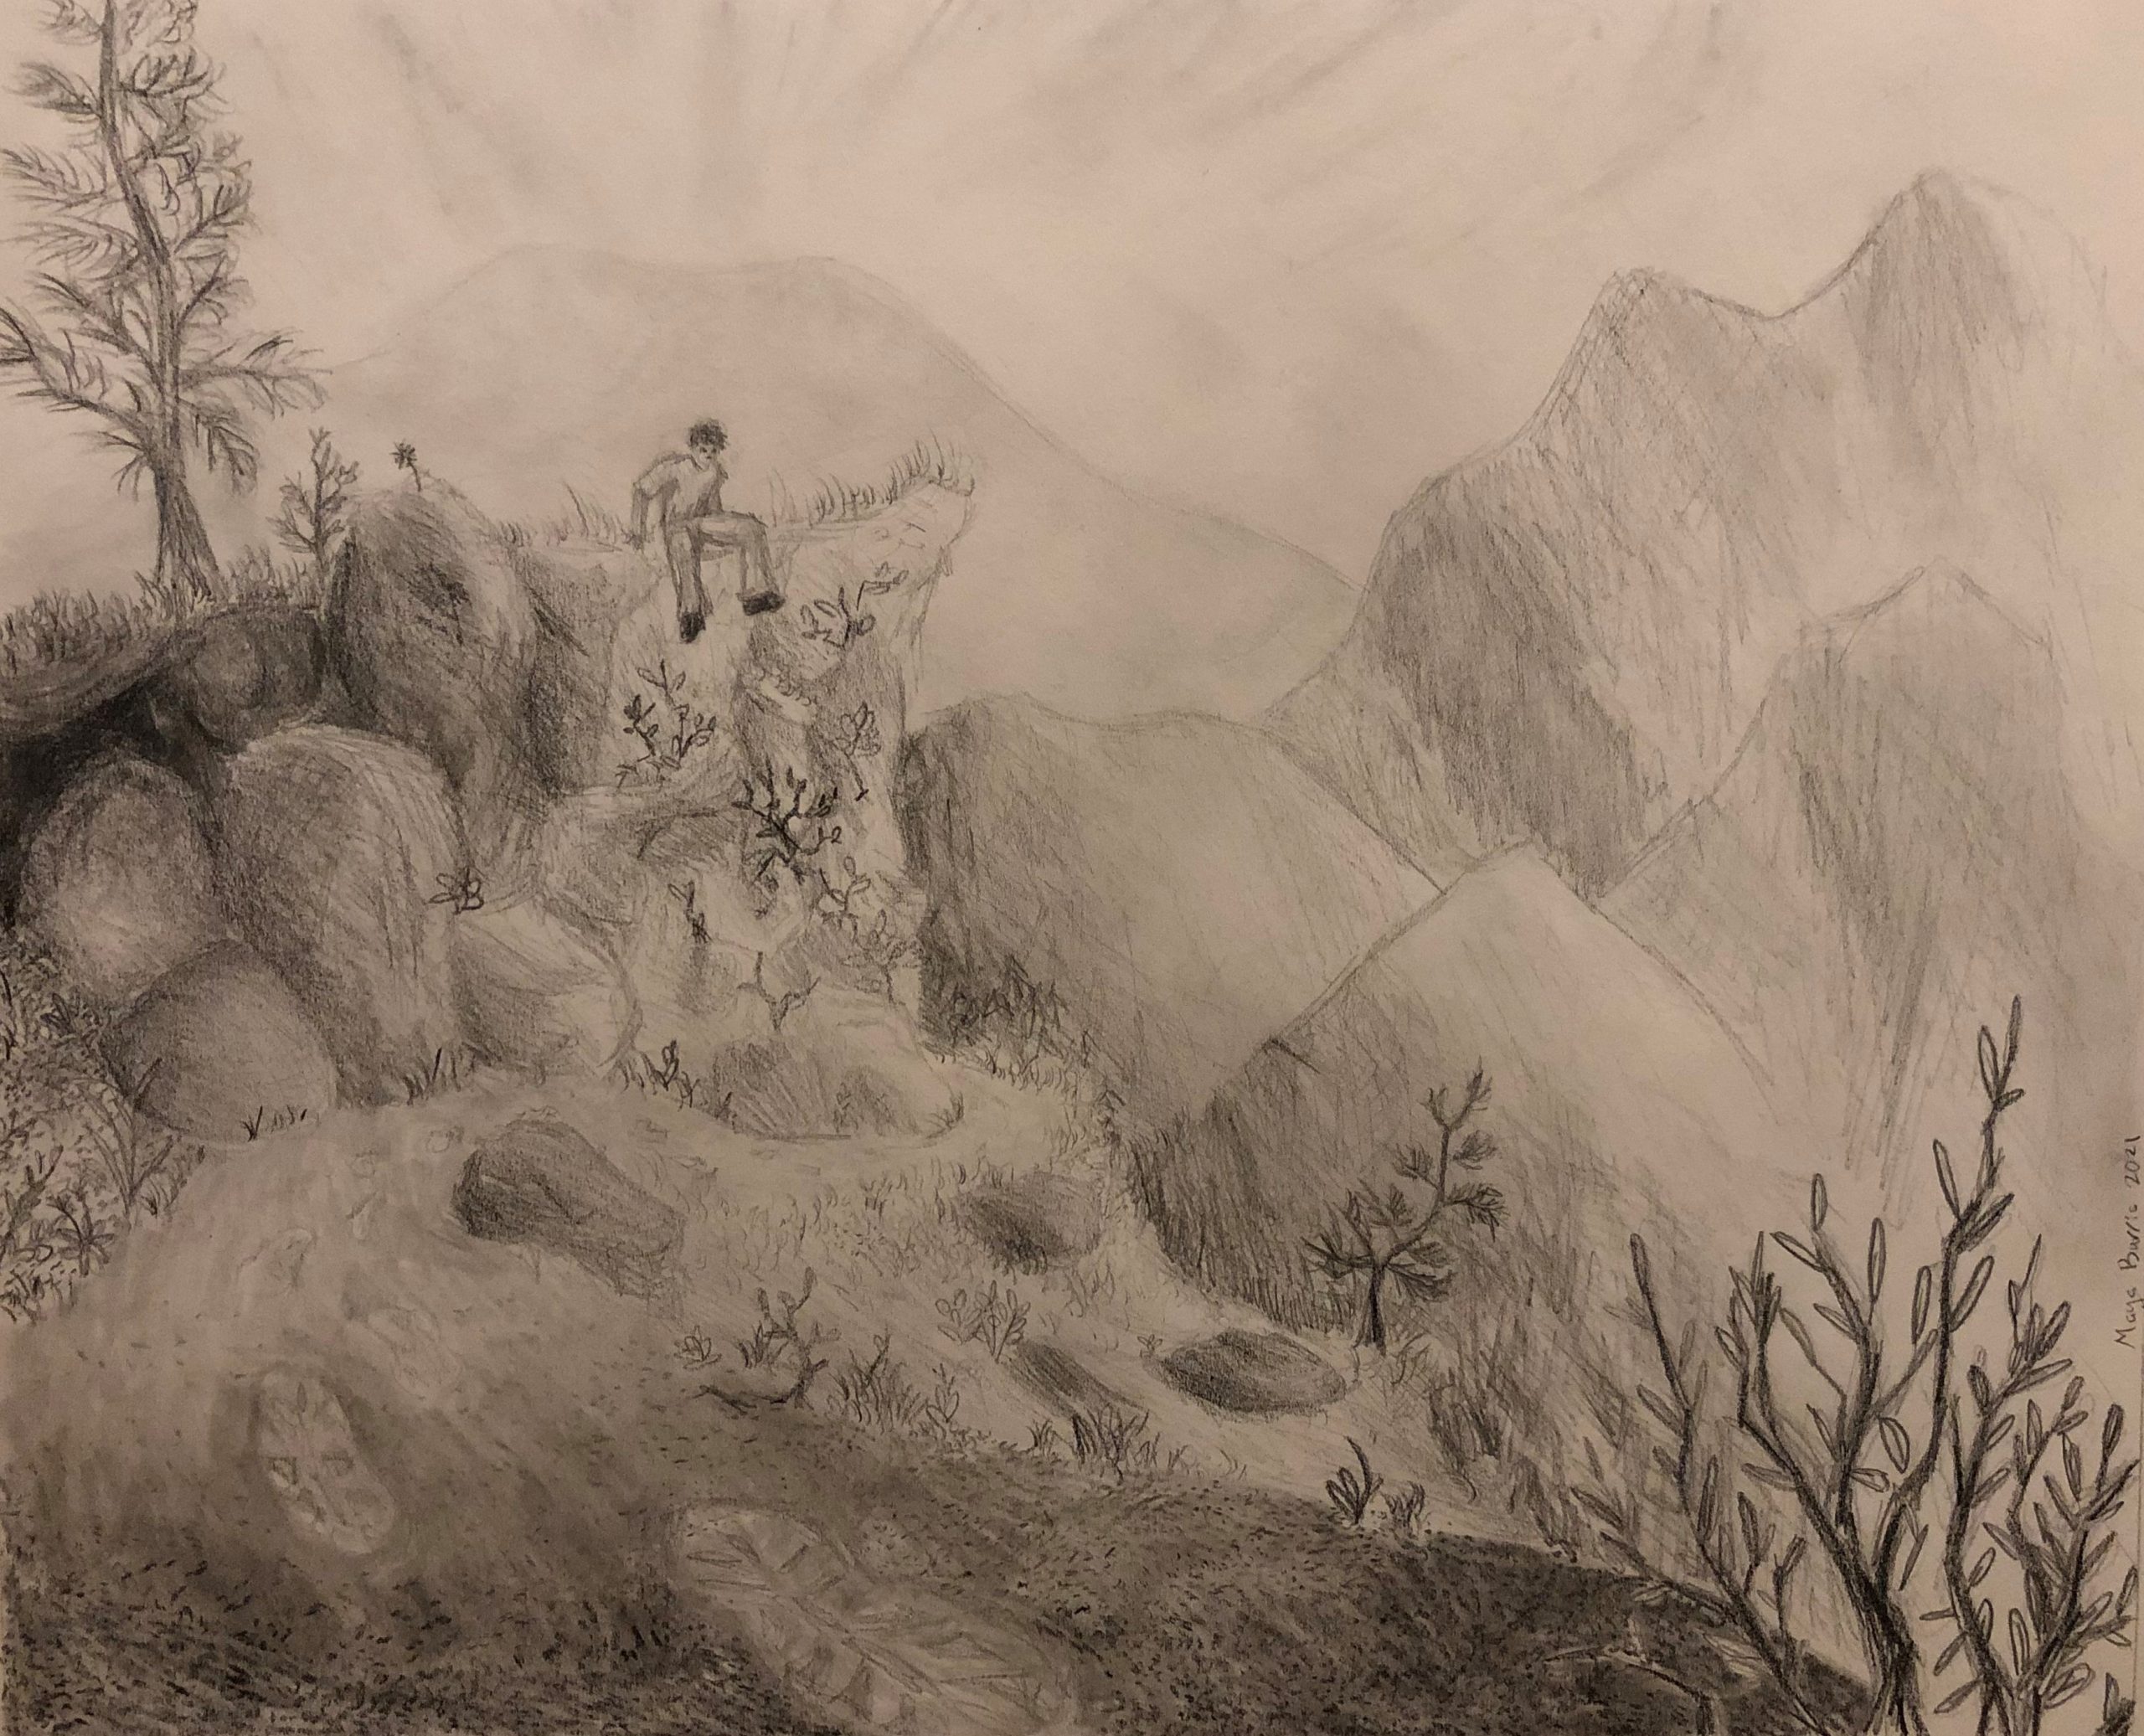 Drawing of person sitting on rock in the mountains